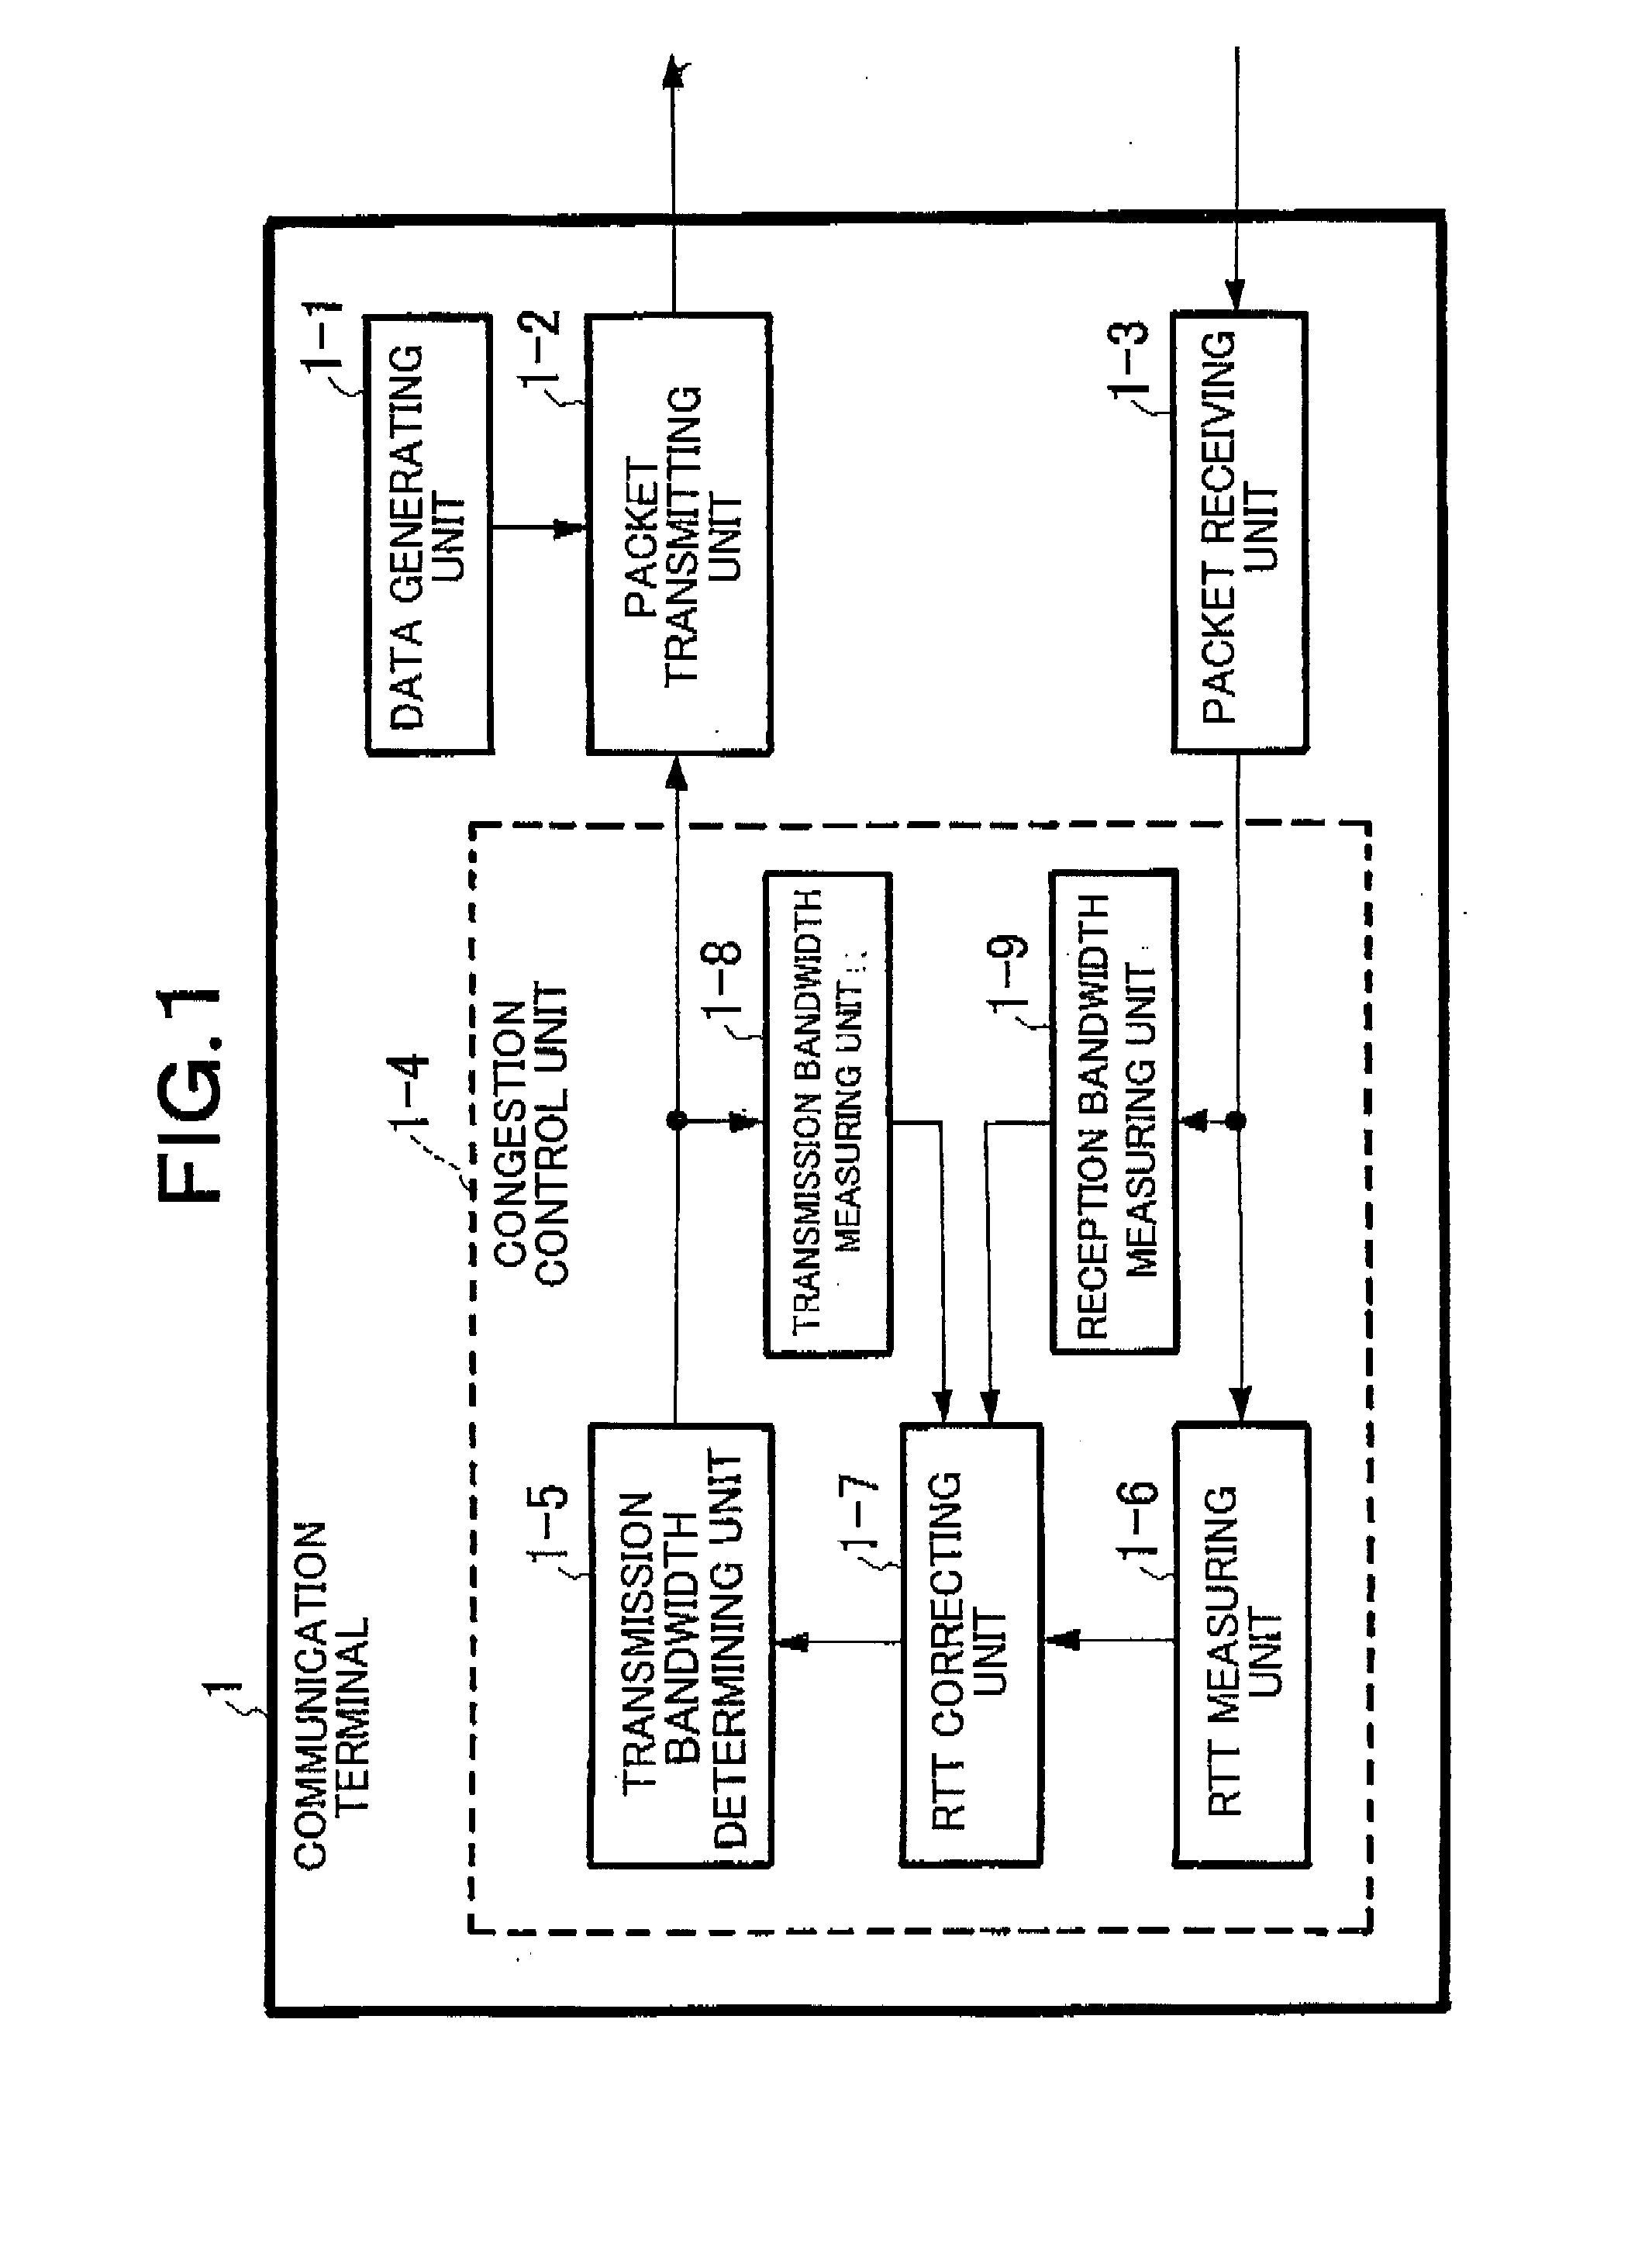 Communication terminal which perform low-delay communication by using a broadband line